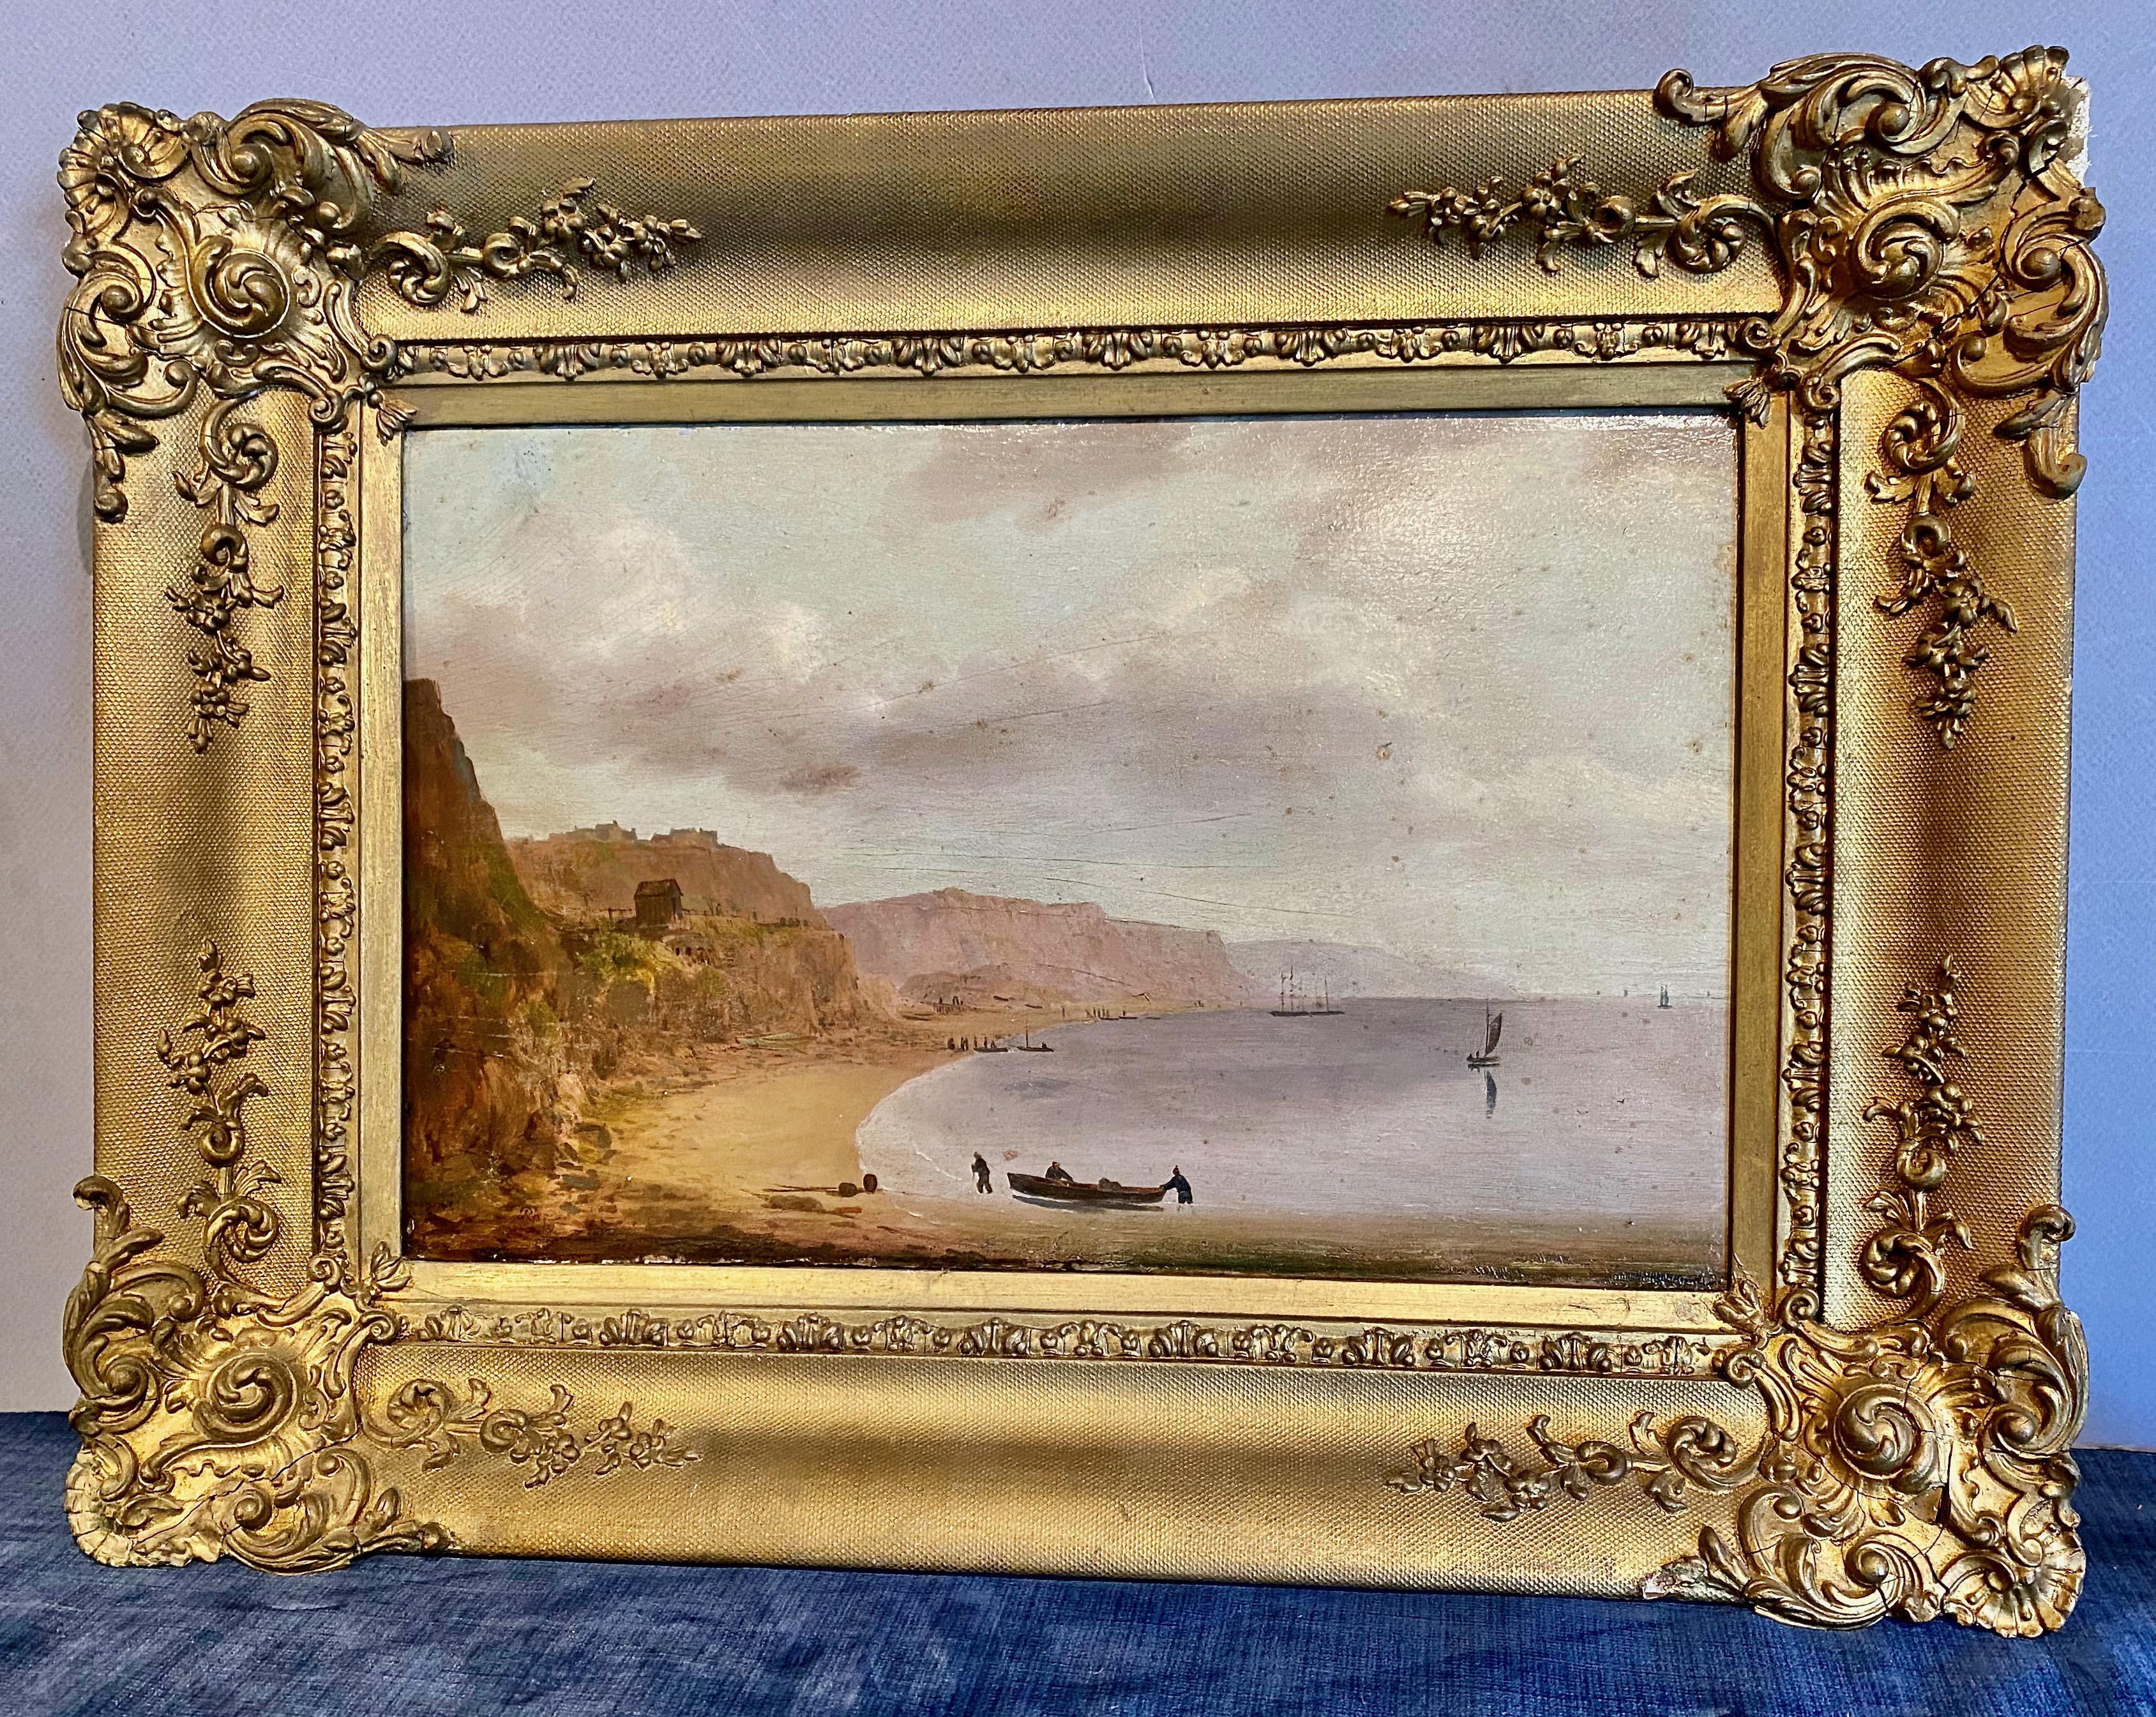 This a charming early 19th century coastal scene that has remained with its original frame. The ethereal tone of the painting draws the viewer closer into the scene. The painting is signed at lower left; however, we have been unable to ascertain the